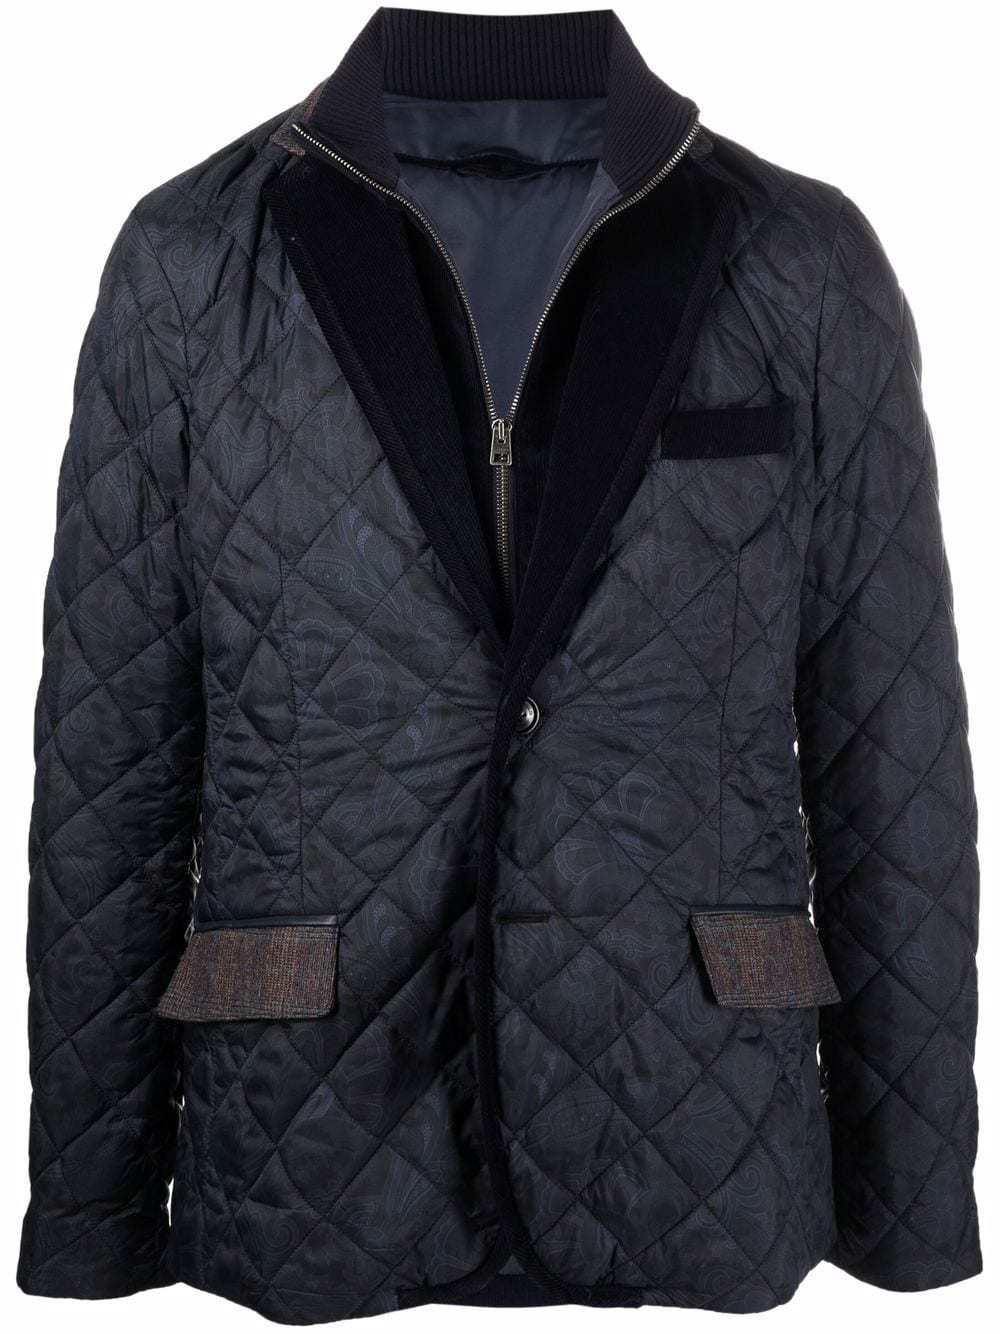 Etro Paisley Print Quilted Jacket, $894 | farfetch.com | Lookastic